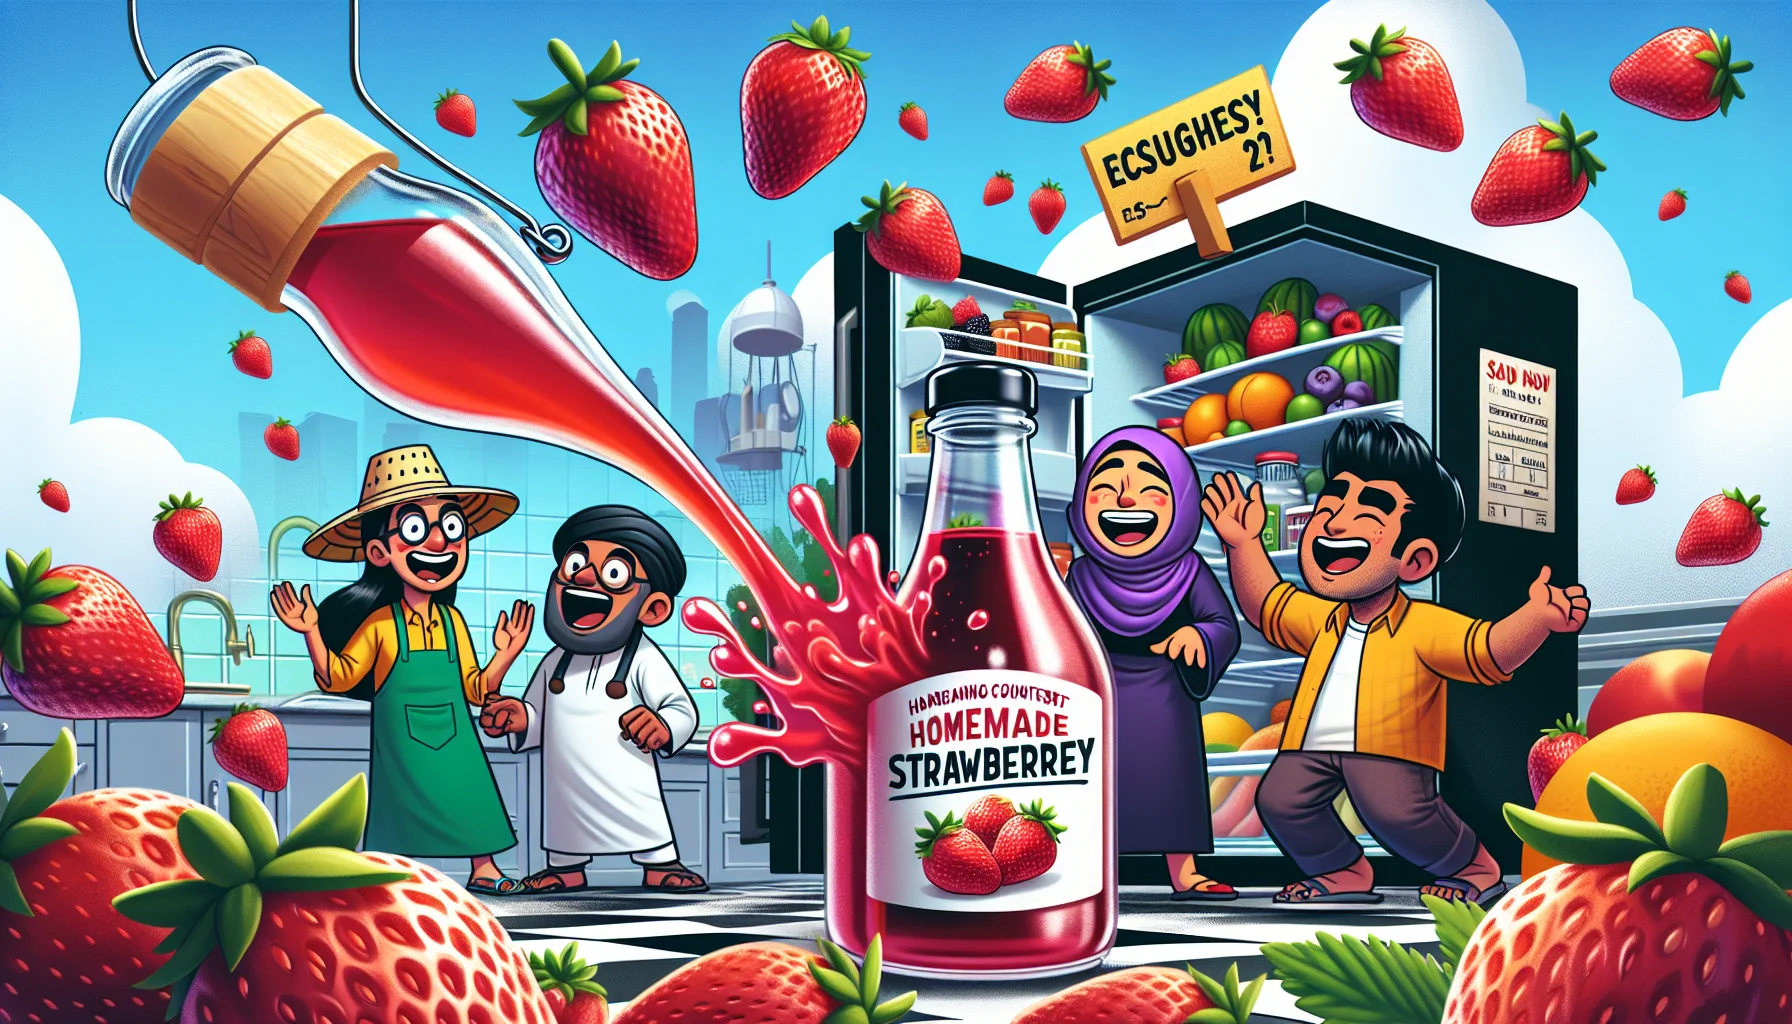 An amusing context featuring homemade strawberry syrup. In the foreground, there's a vibrant bottle filled with fresh ruby-red syrup showcasing the delicious strawberries that were used to make it. Charming cartoon characters—South Asian man, Hispanic woman, and Middle-Eastern child—all beam with delight. They are depicted in a surreal kitchen, where the fridge is hilariously overflowing with fruits, berries tumbling out. The characters are engaged in joyful high jinks like catching berries with an upside-down hat, launching fruits as if they were rockets, and exclaiming over the cost tags showing absurdly low prices. An atmosphere of fun, health, and economy fills the scene.